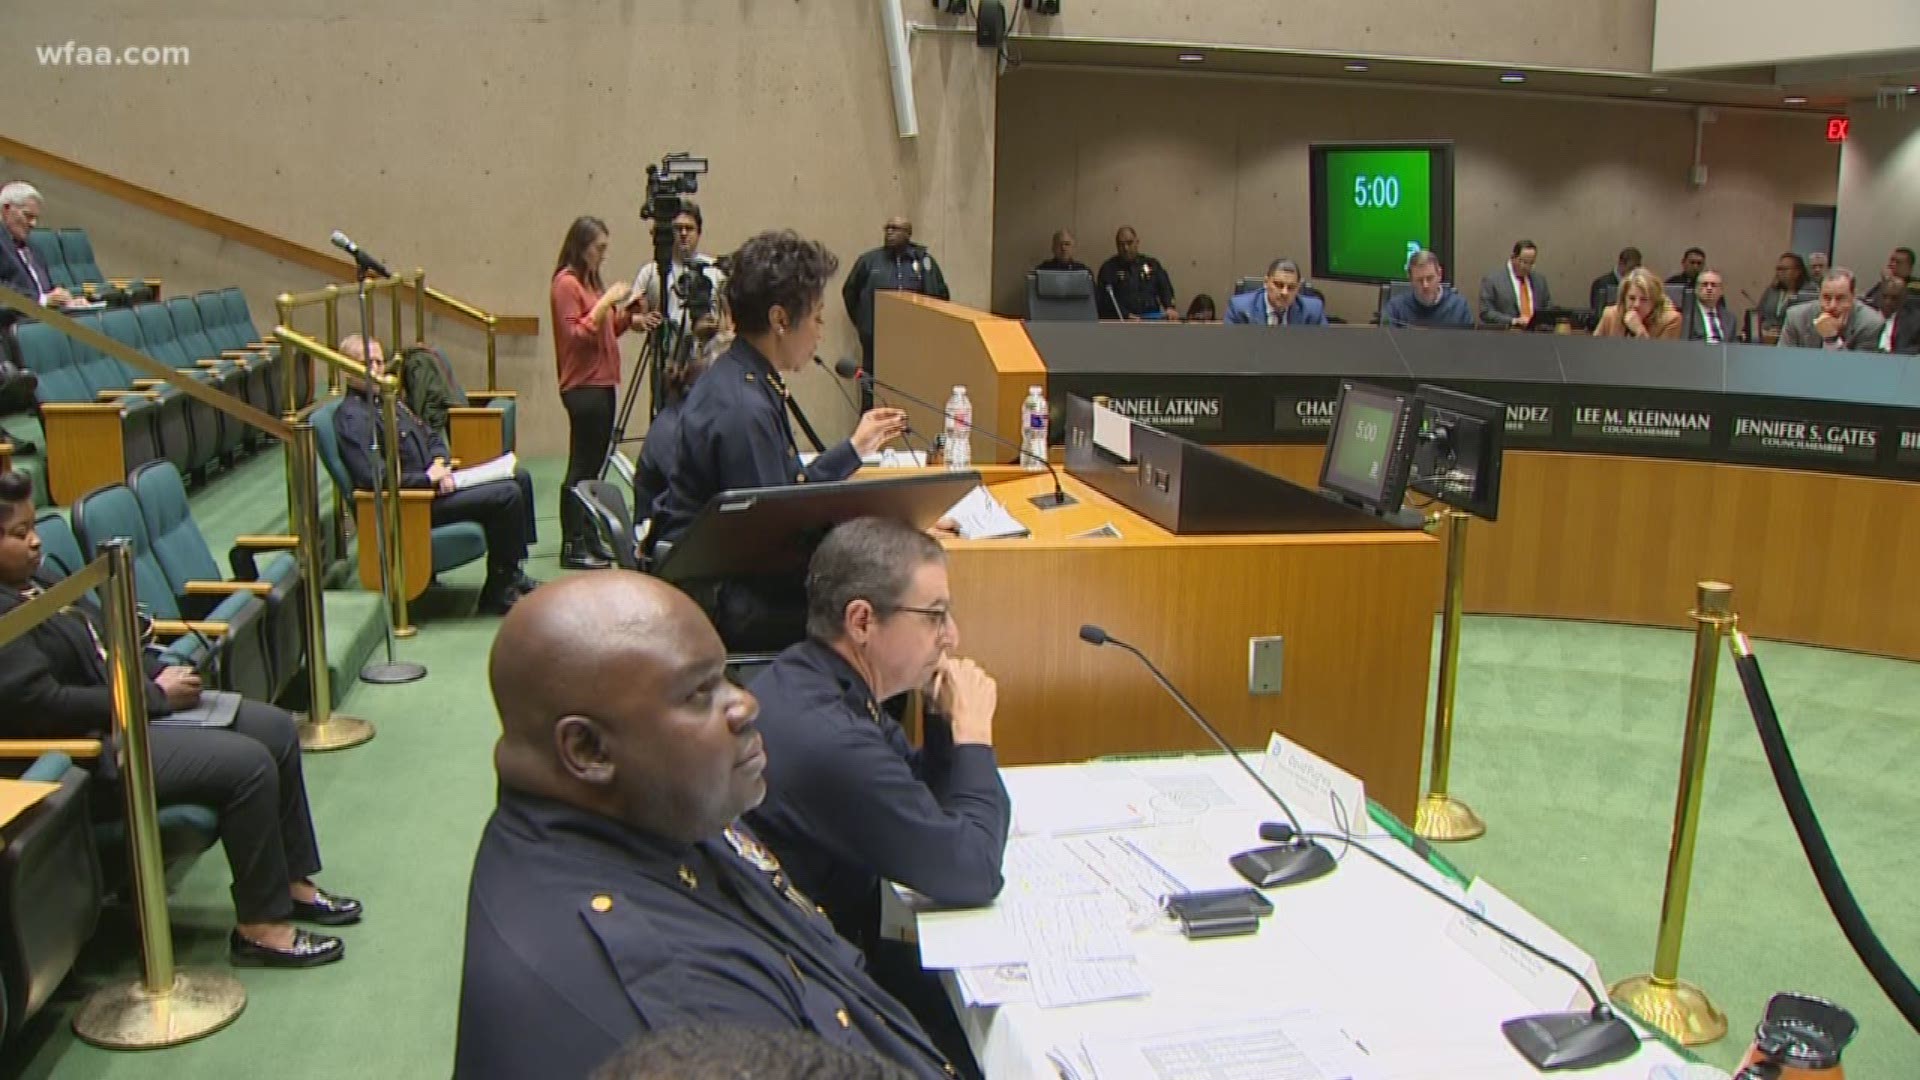 Dallas Police Chief Renee Hall faced plenty of questions from the public safety committee on her plan to reduce crime in the city.